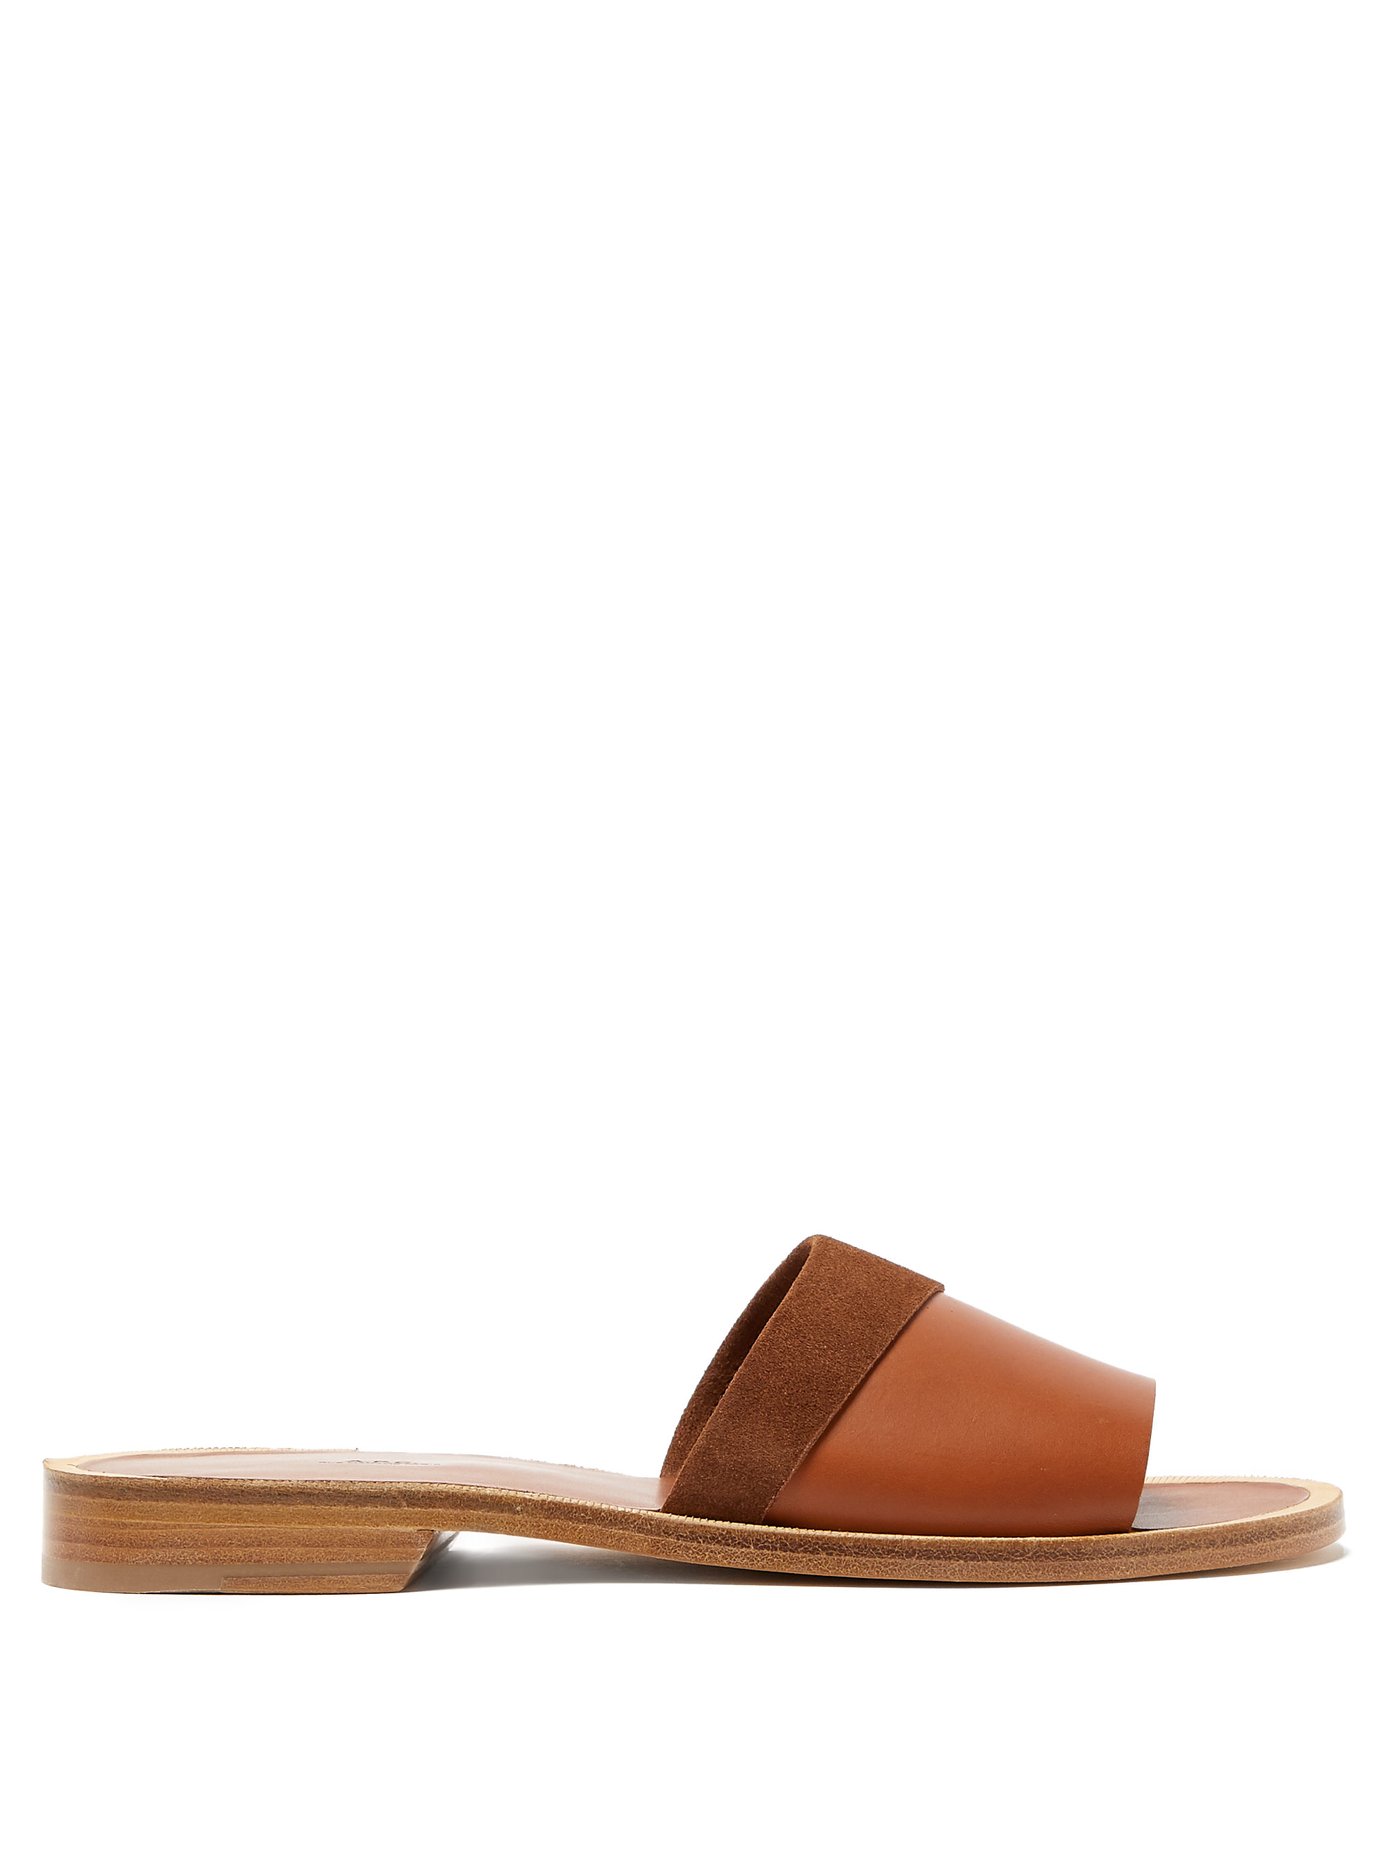 Kenza leather and suede slides | A.P.C 